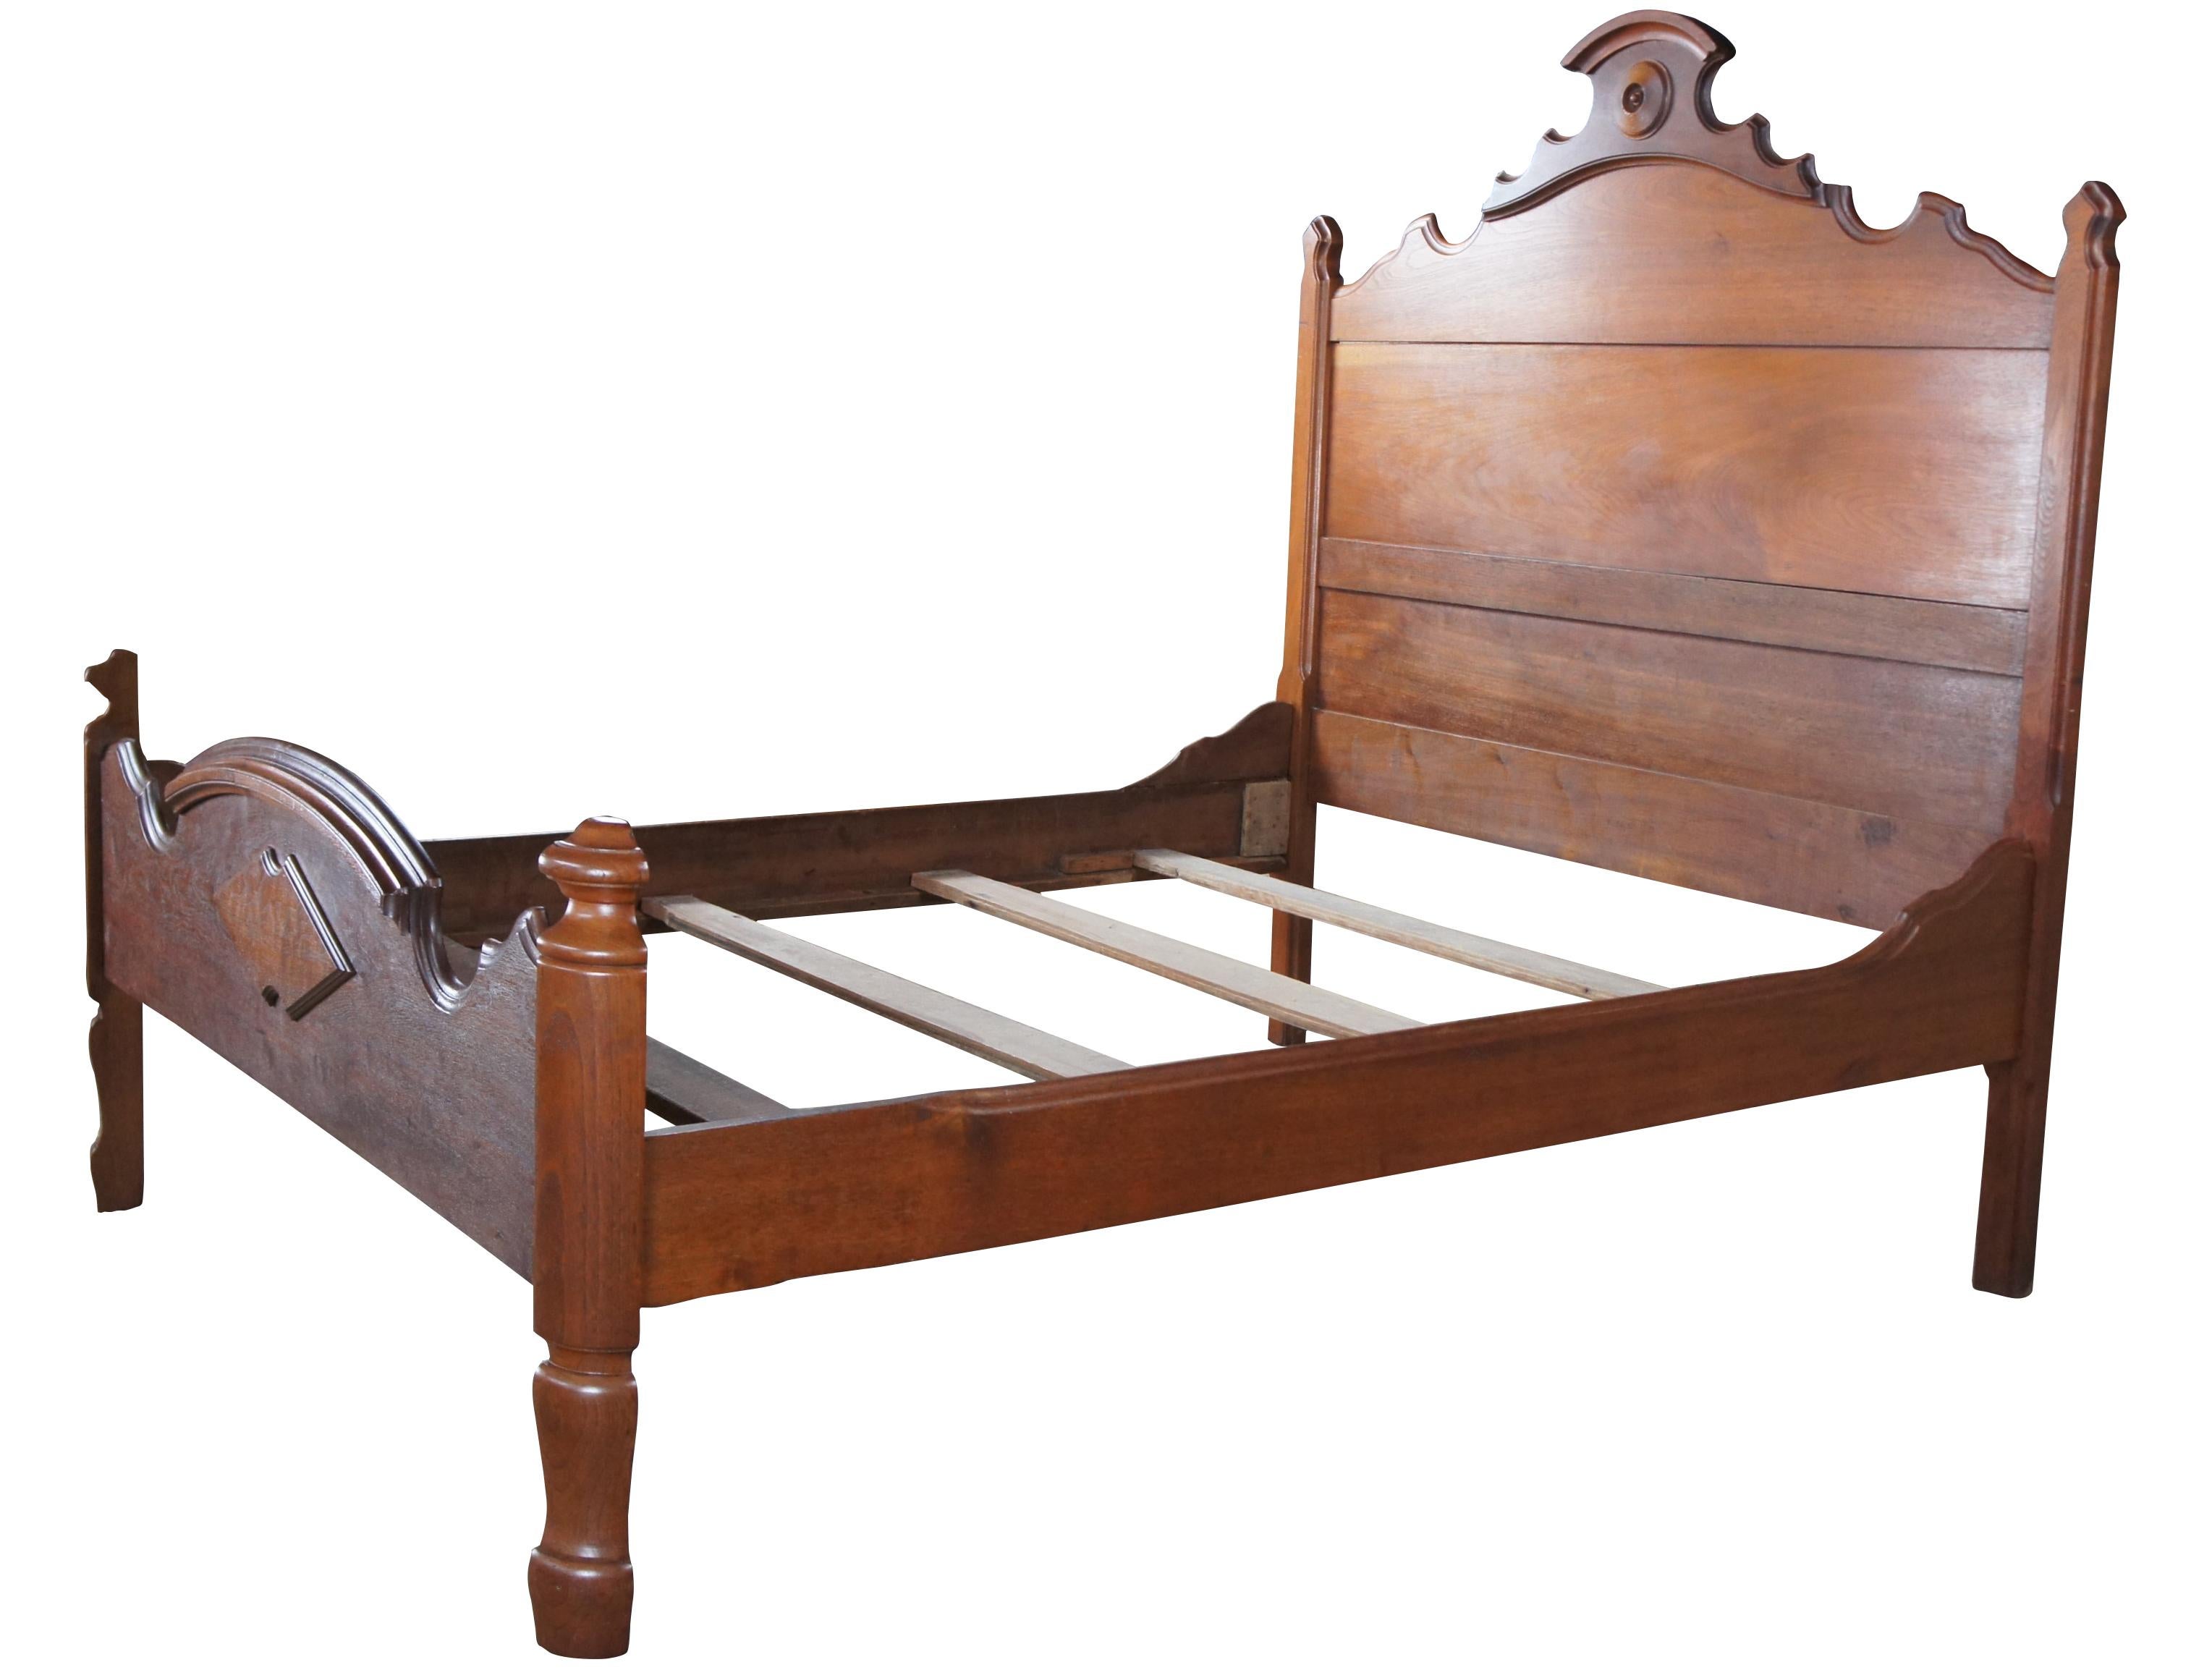 An antique Victorian era bed frame. Made from walnut with carved frame featuring embellishments along the headboard and foot board. 

Measures: 57